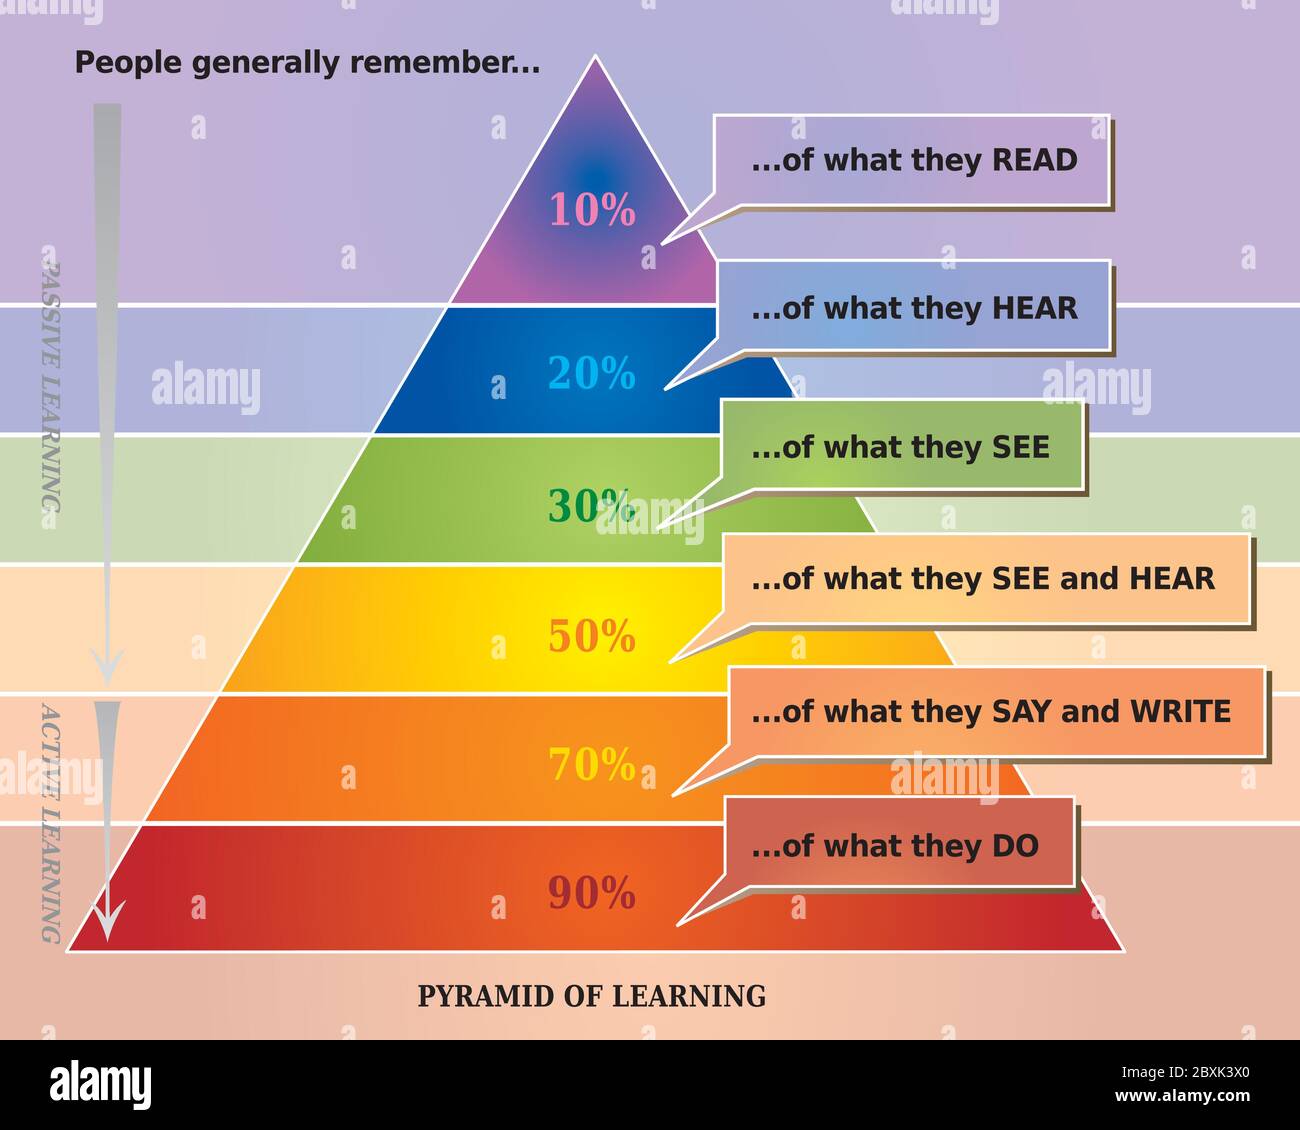 Learning Pyramid Illustration showing What People Remember - English Language Stock Vector